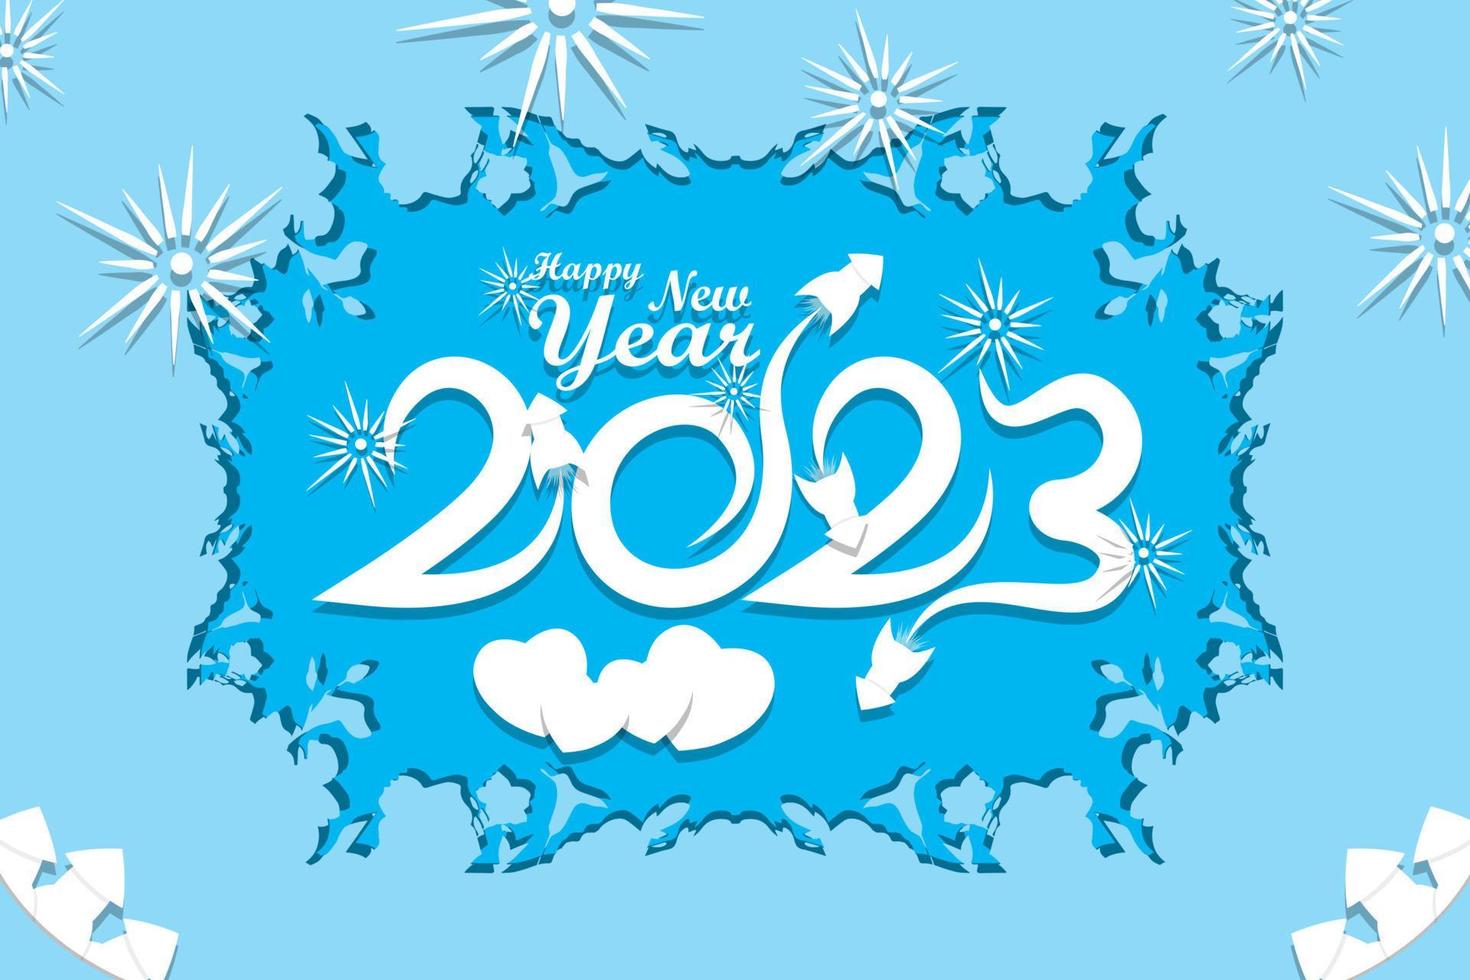 happy new year 2023, rocket design form a number, white and light blue, paper cut style vector illustration